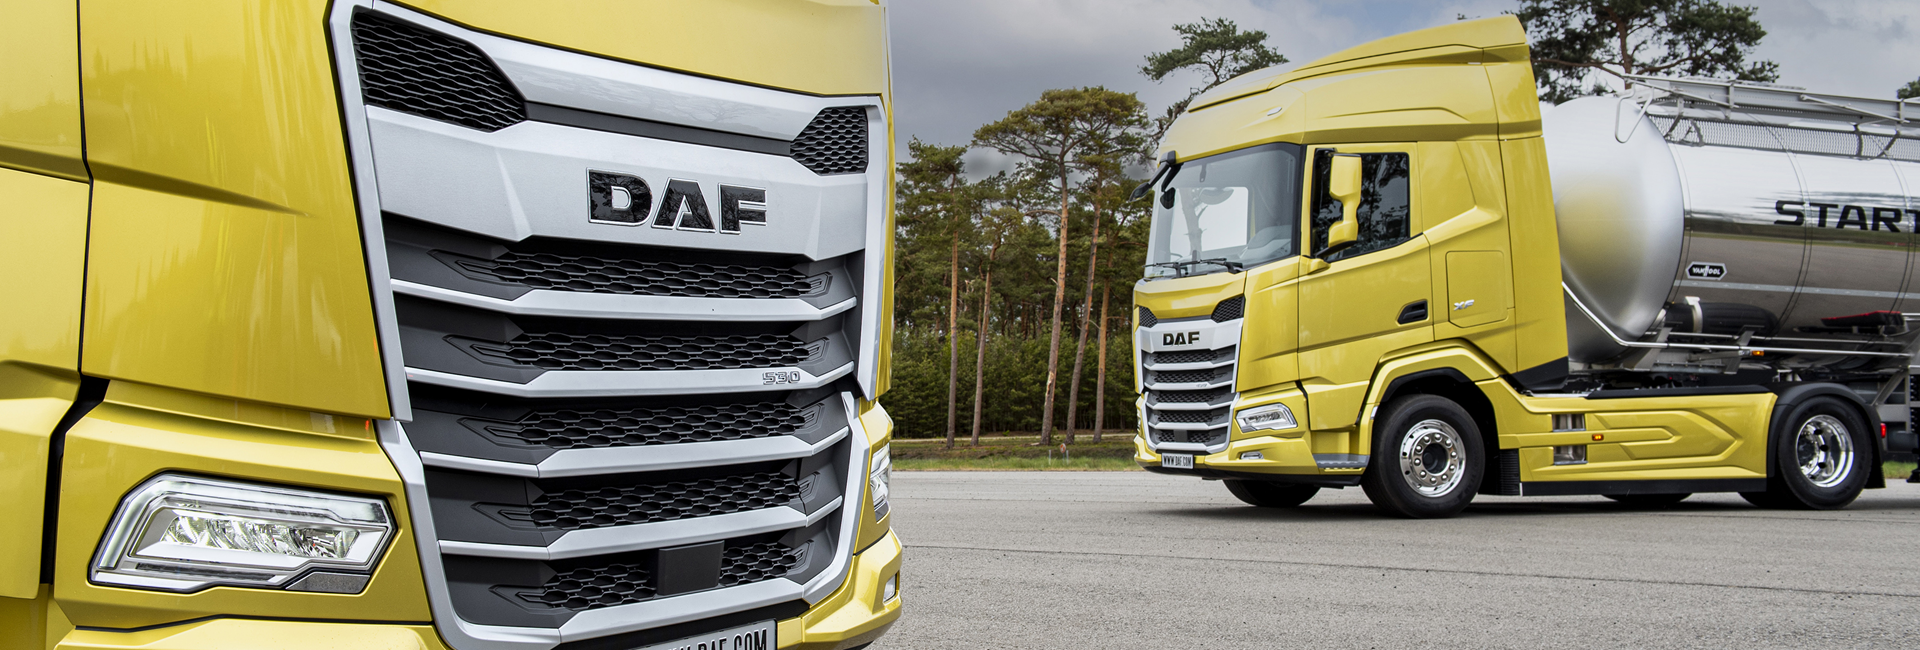 DAF-TR-The-New-Generation-DAF-trucks-2021-XGplus-left-and-XF-right